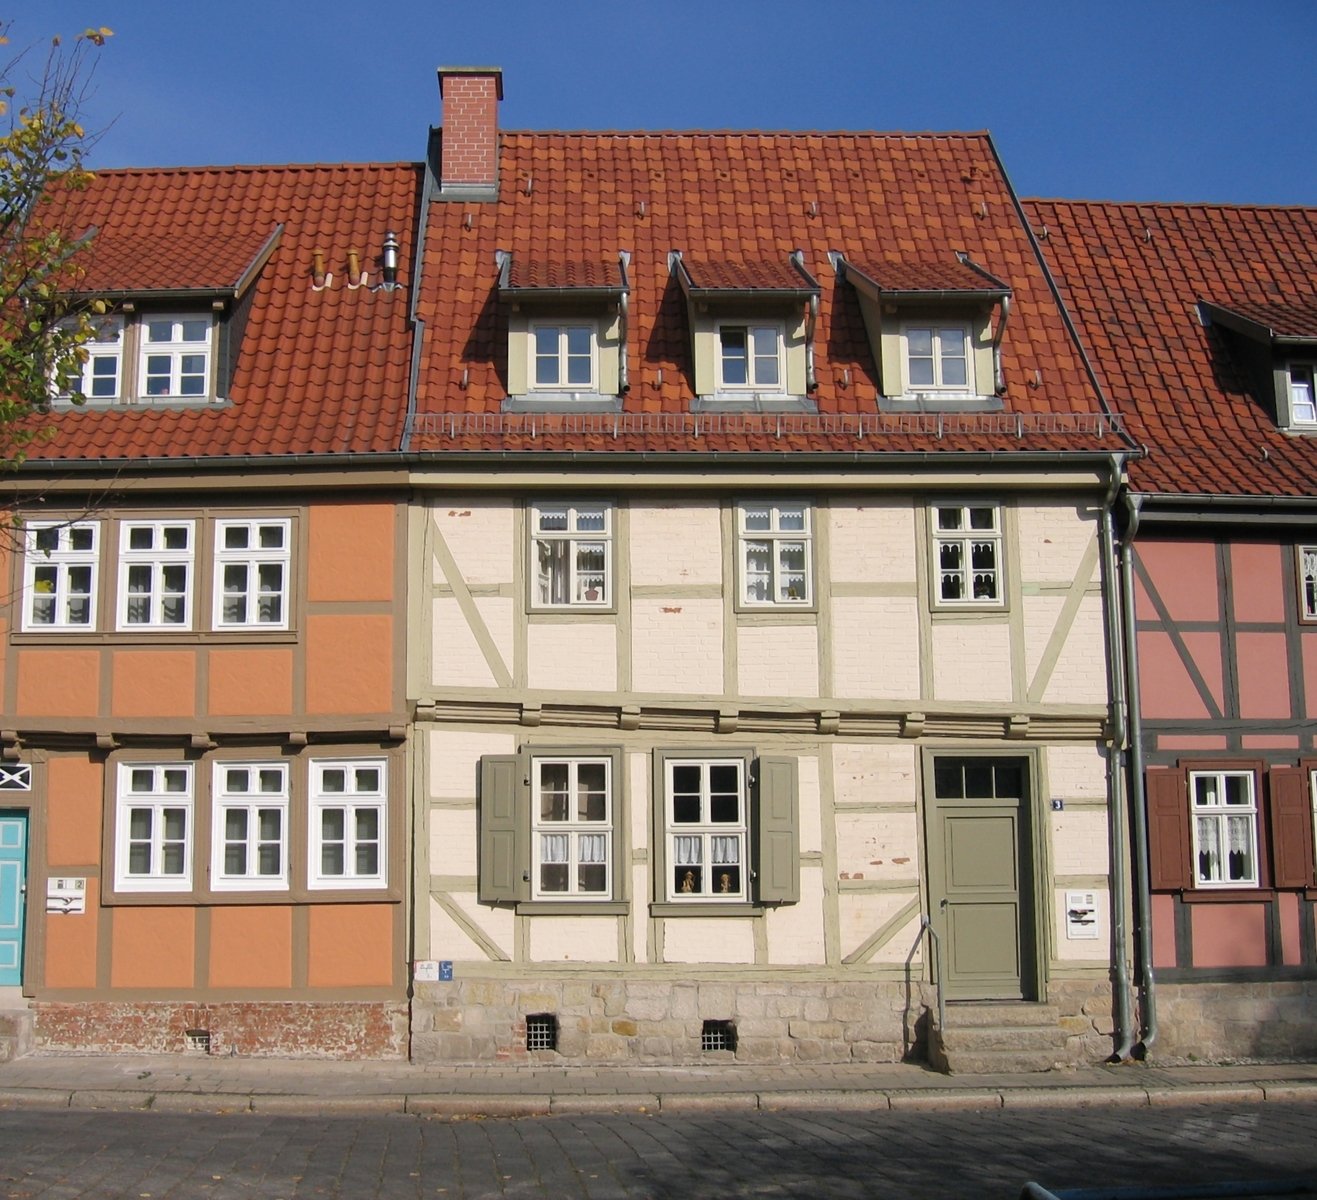 old buildings are painted with different colors